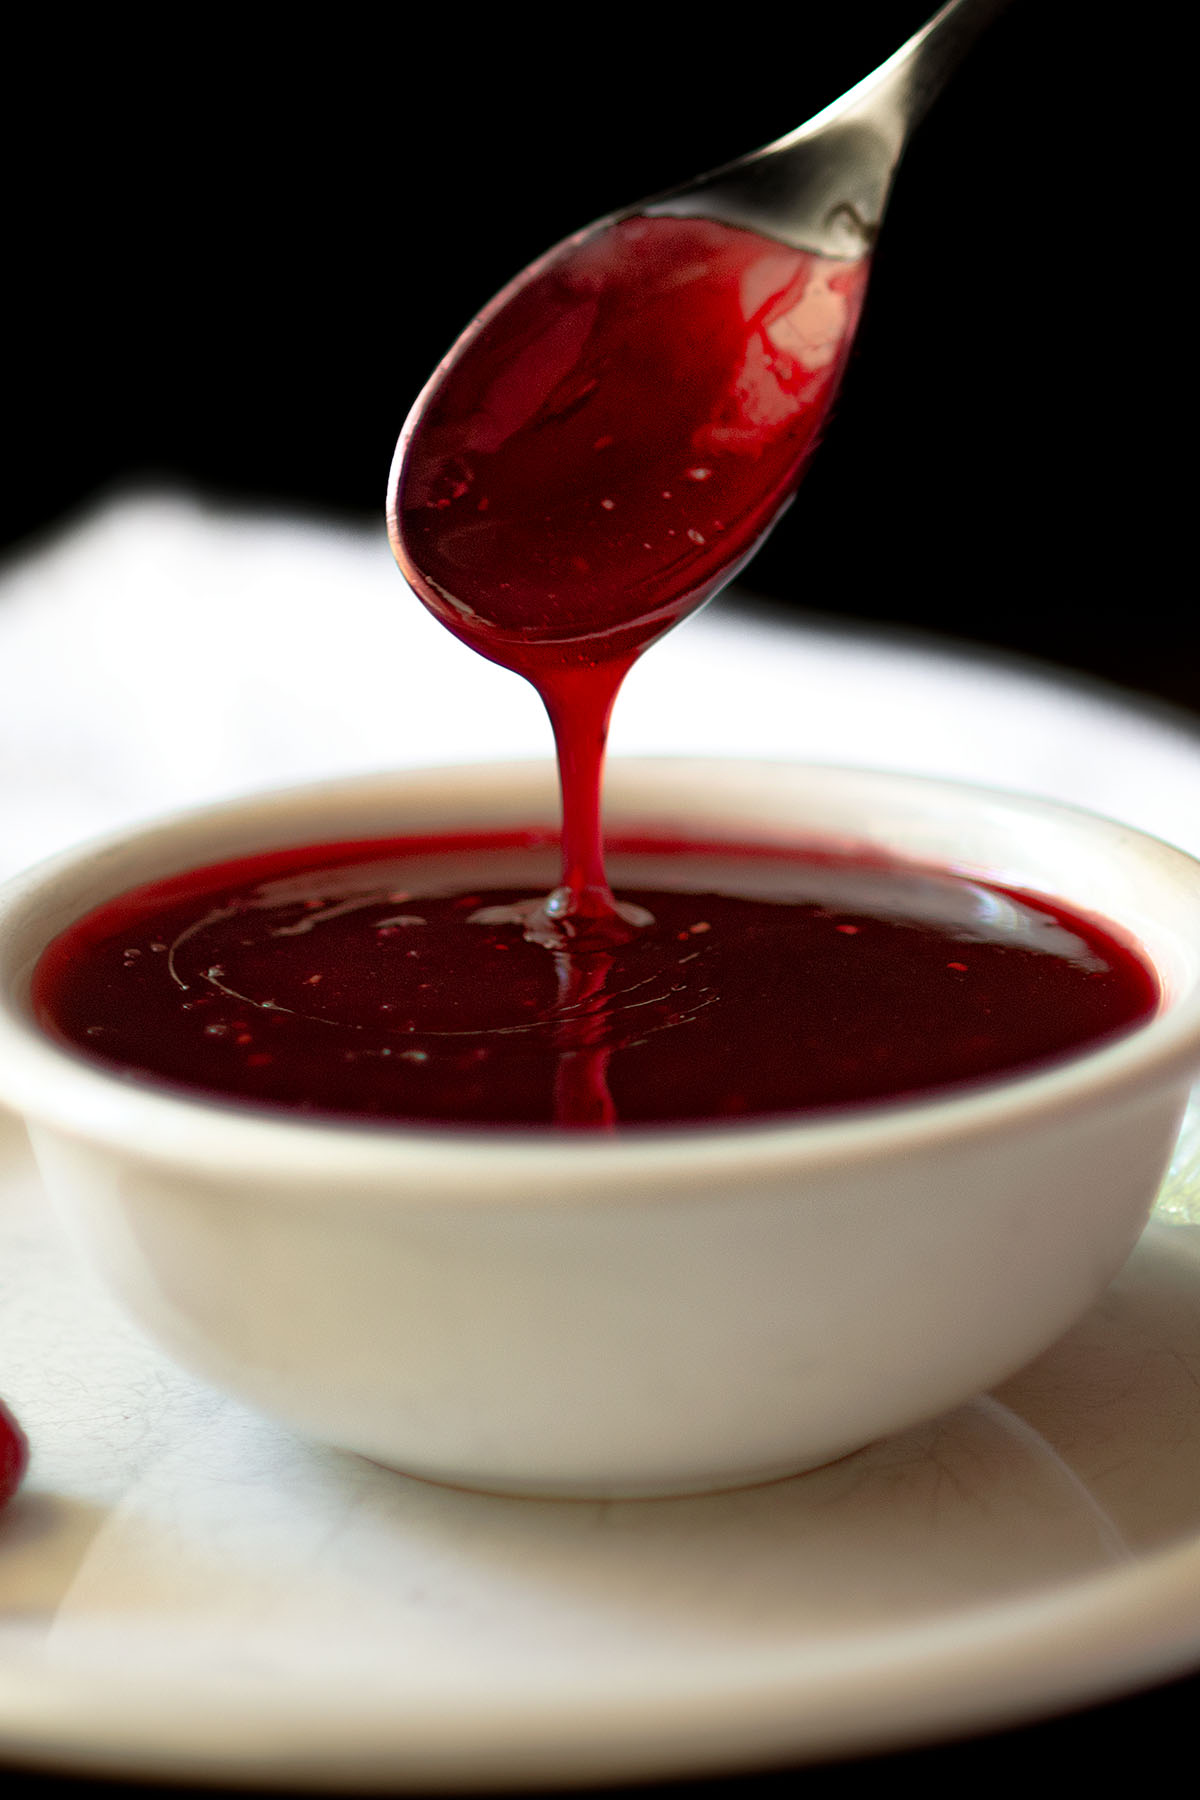 A bowl or raspberry dipping sauce with a spoon dripping sauce.